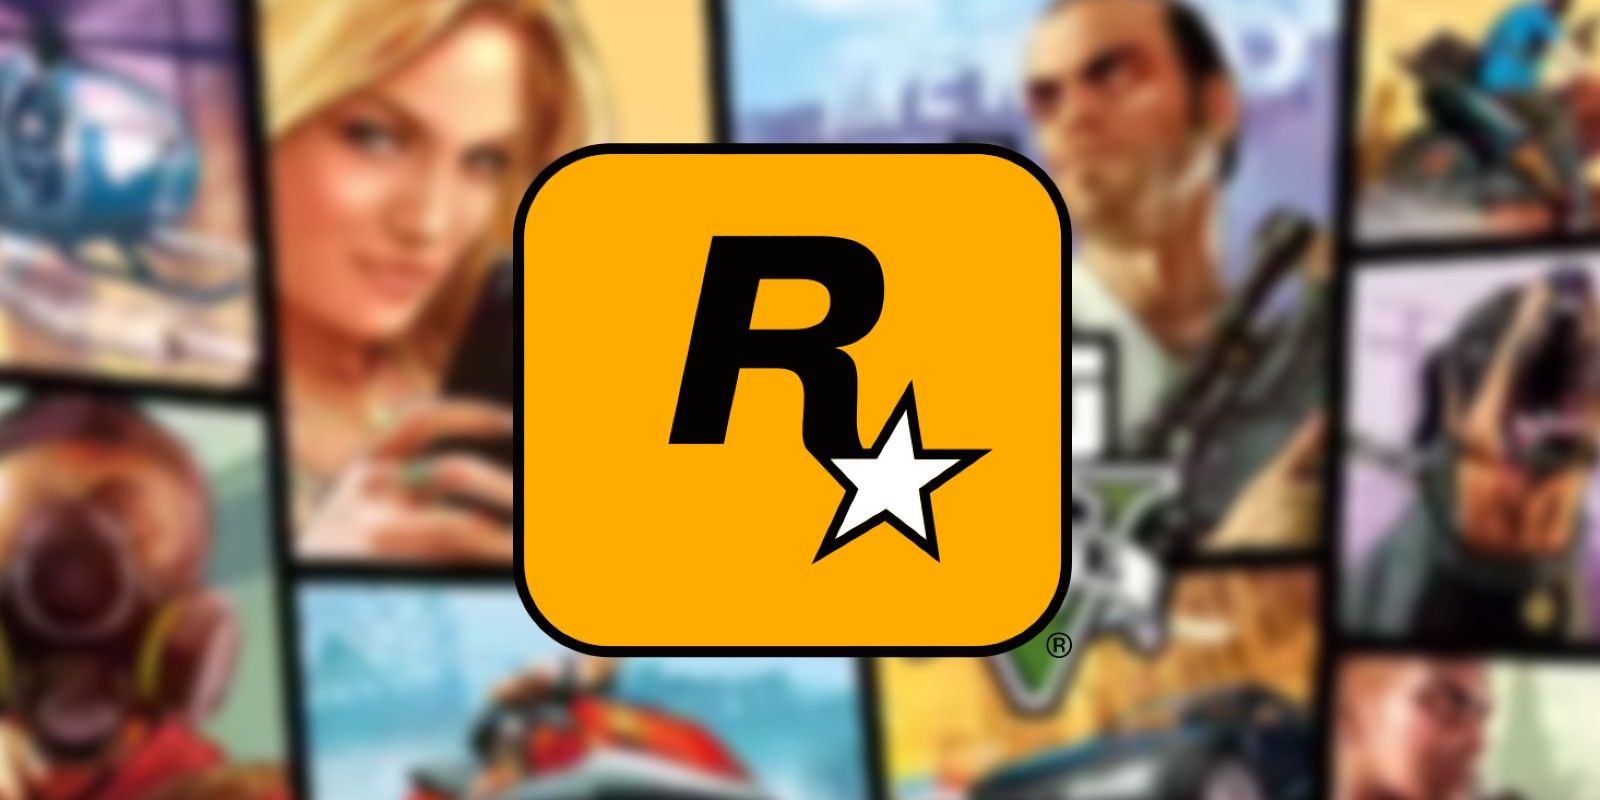 Key art for GTA 5. blurred, with a Rockstar Games yellow logo atop